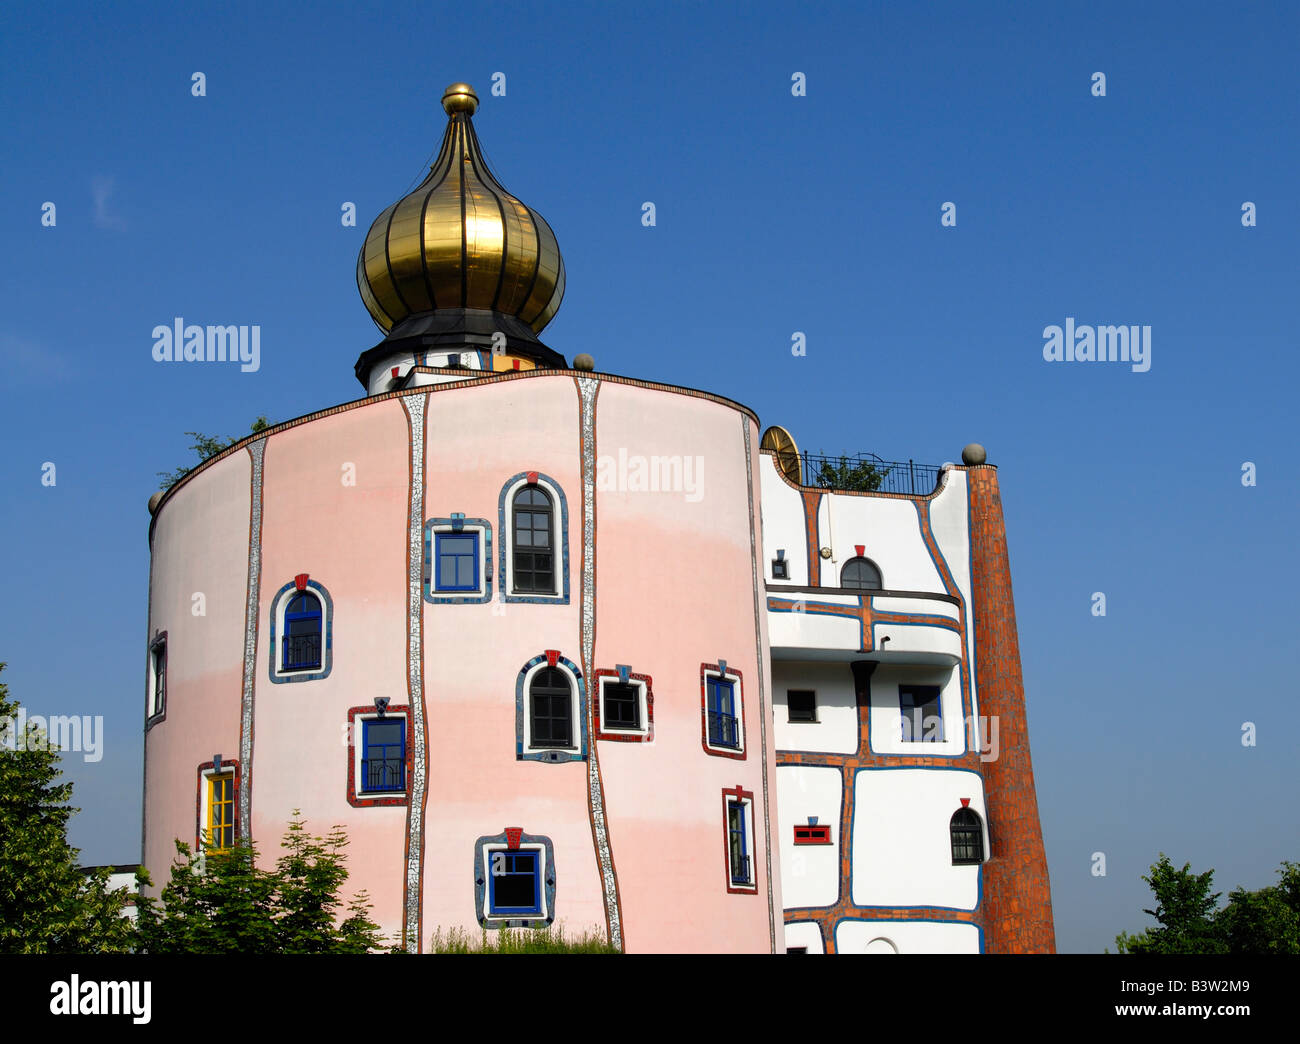 Eccentric Architecture of Rogner Thermal Spa and Hotel Designed by Friedensreich Hundertwasser in Bad Blumau Austria Stock Photo